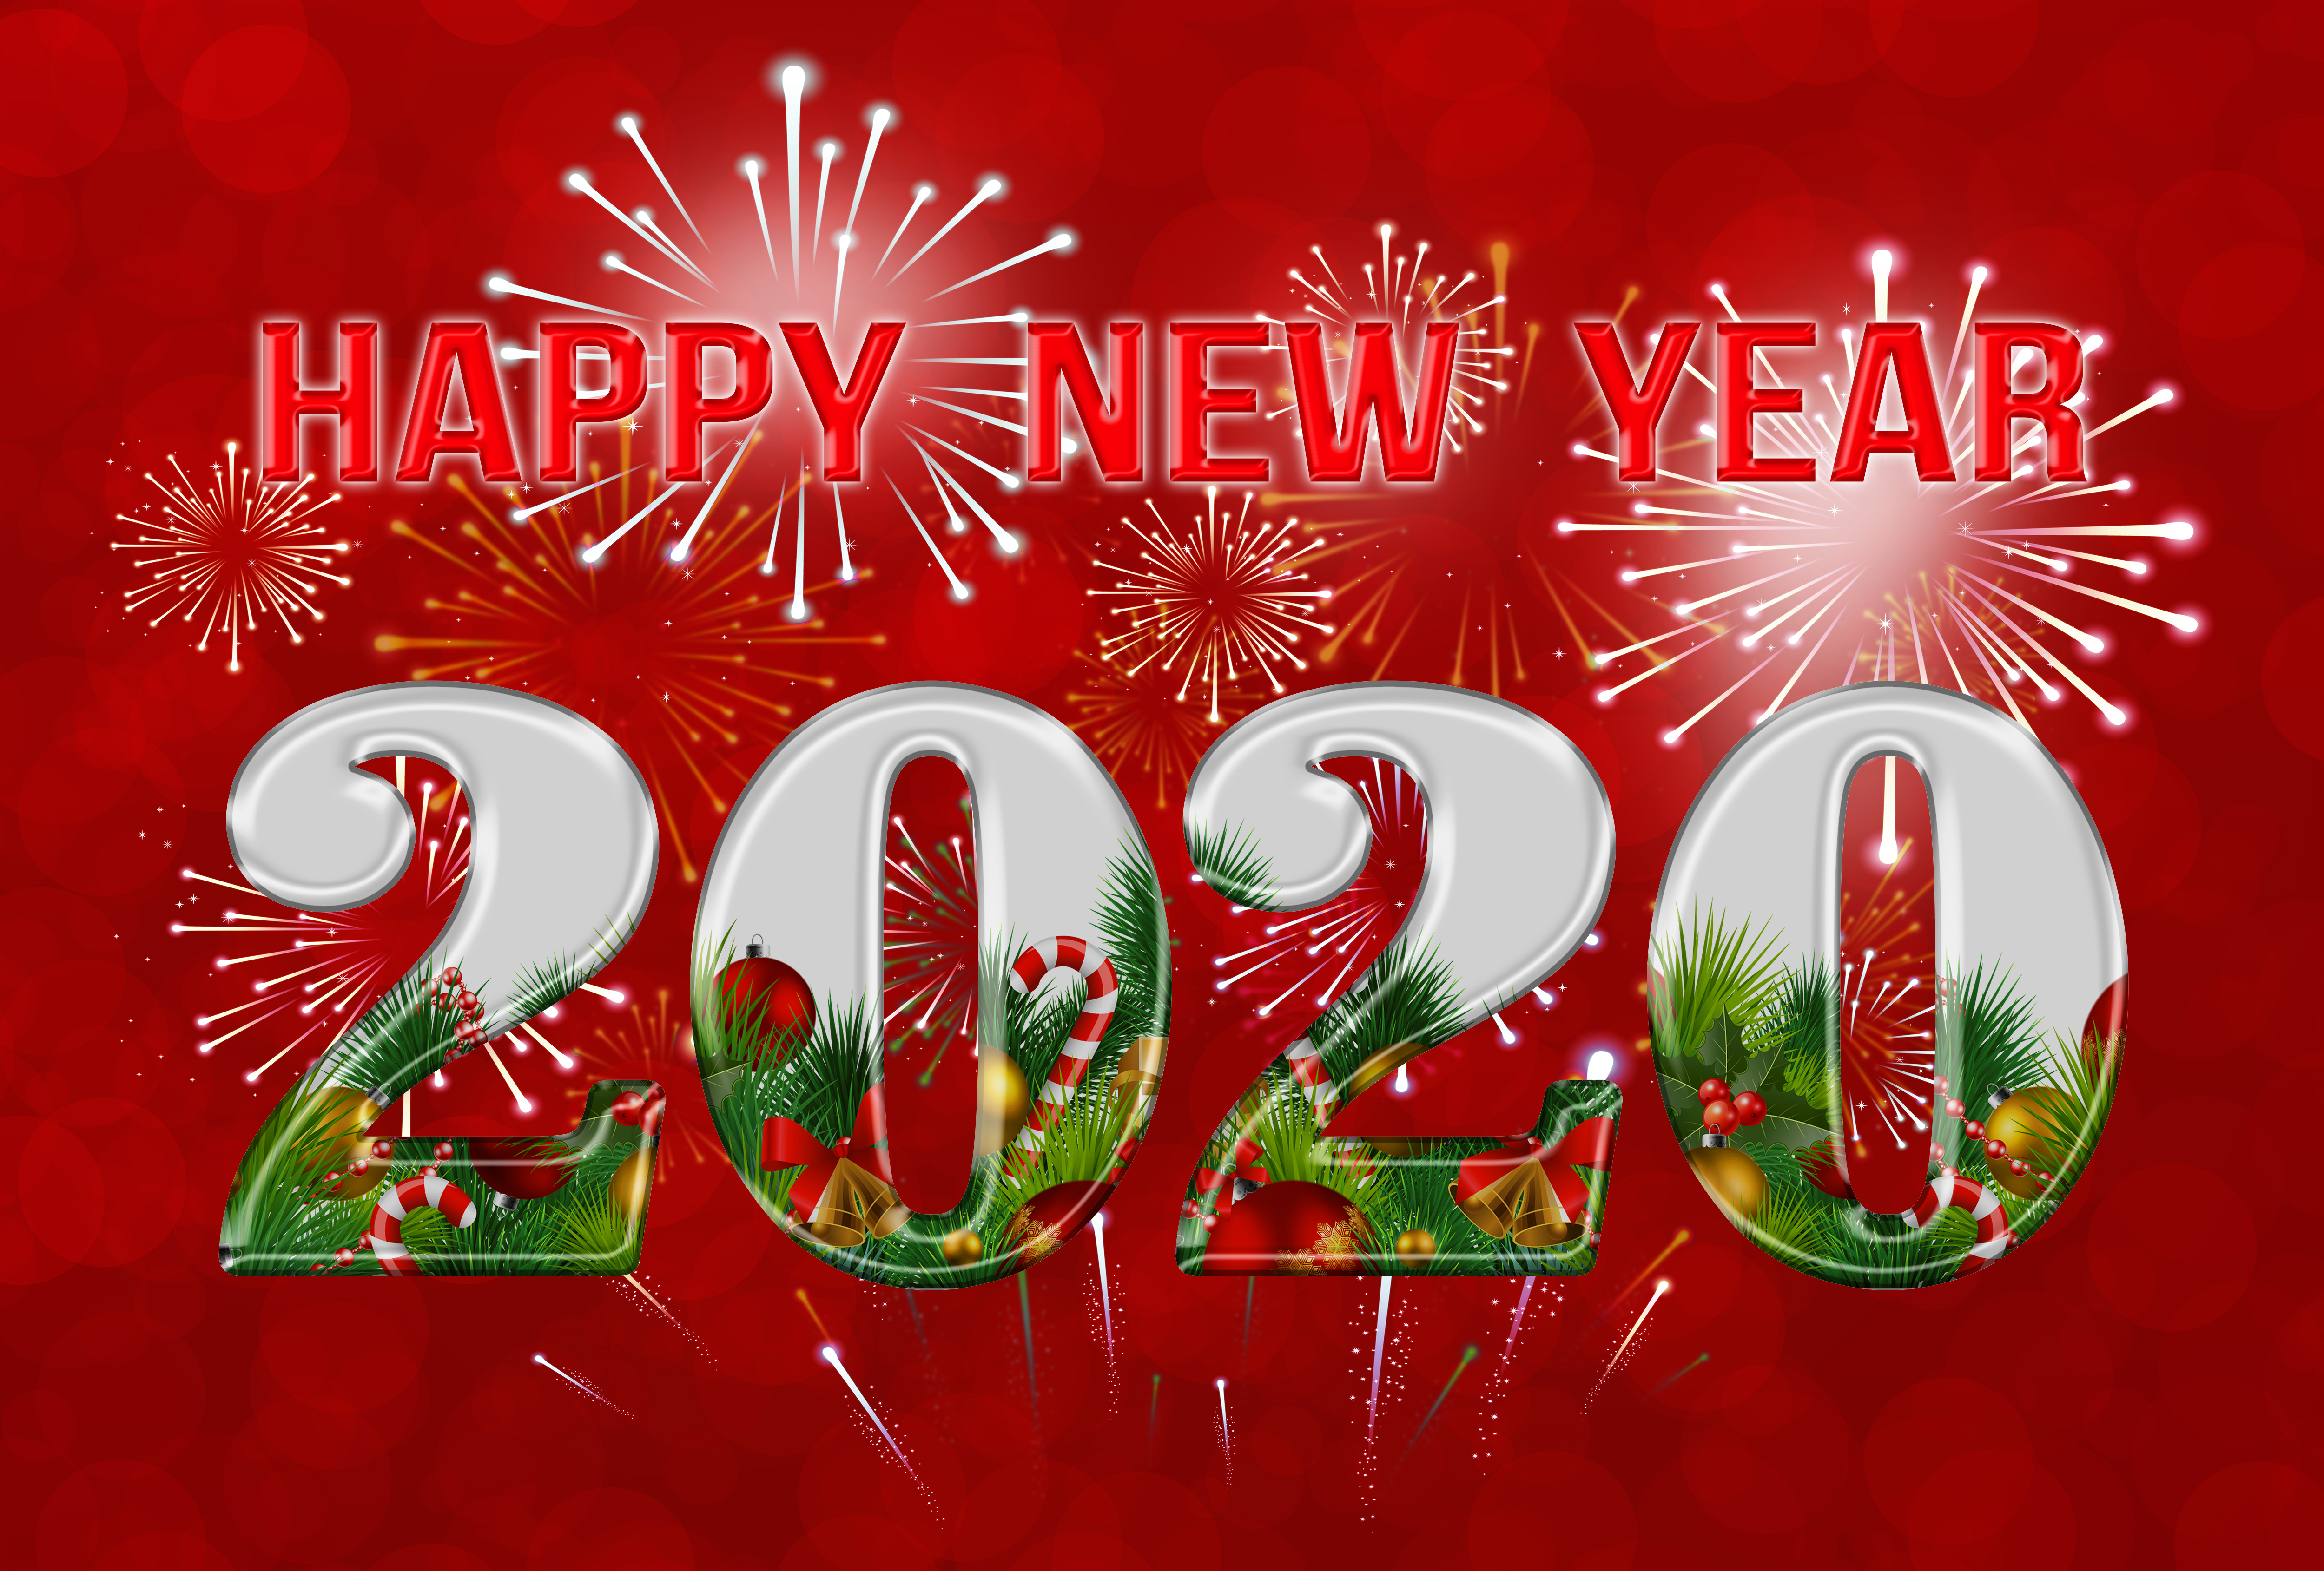 Happy New Year 2020 Red Background | Gallery Yopriceville ...